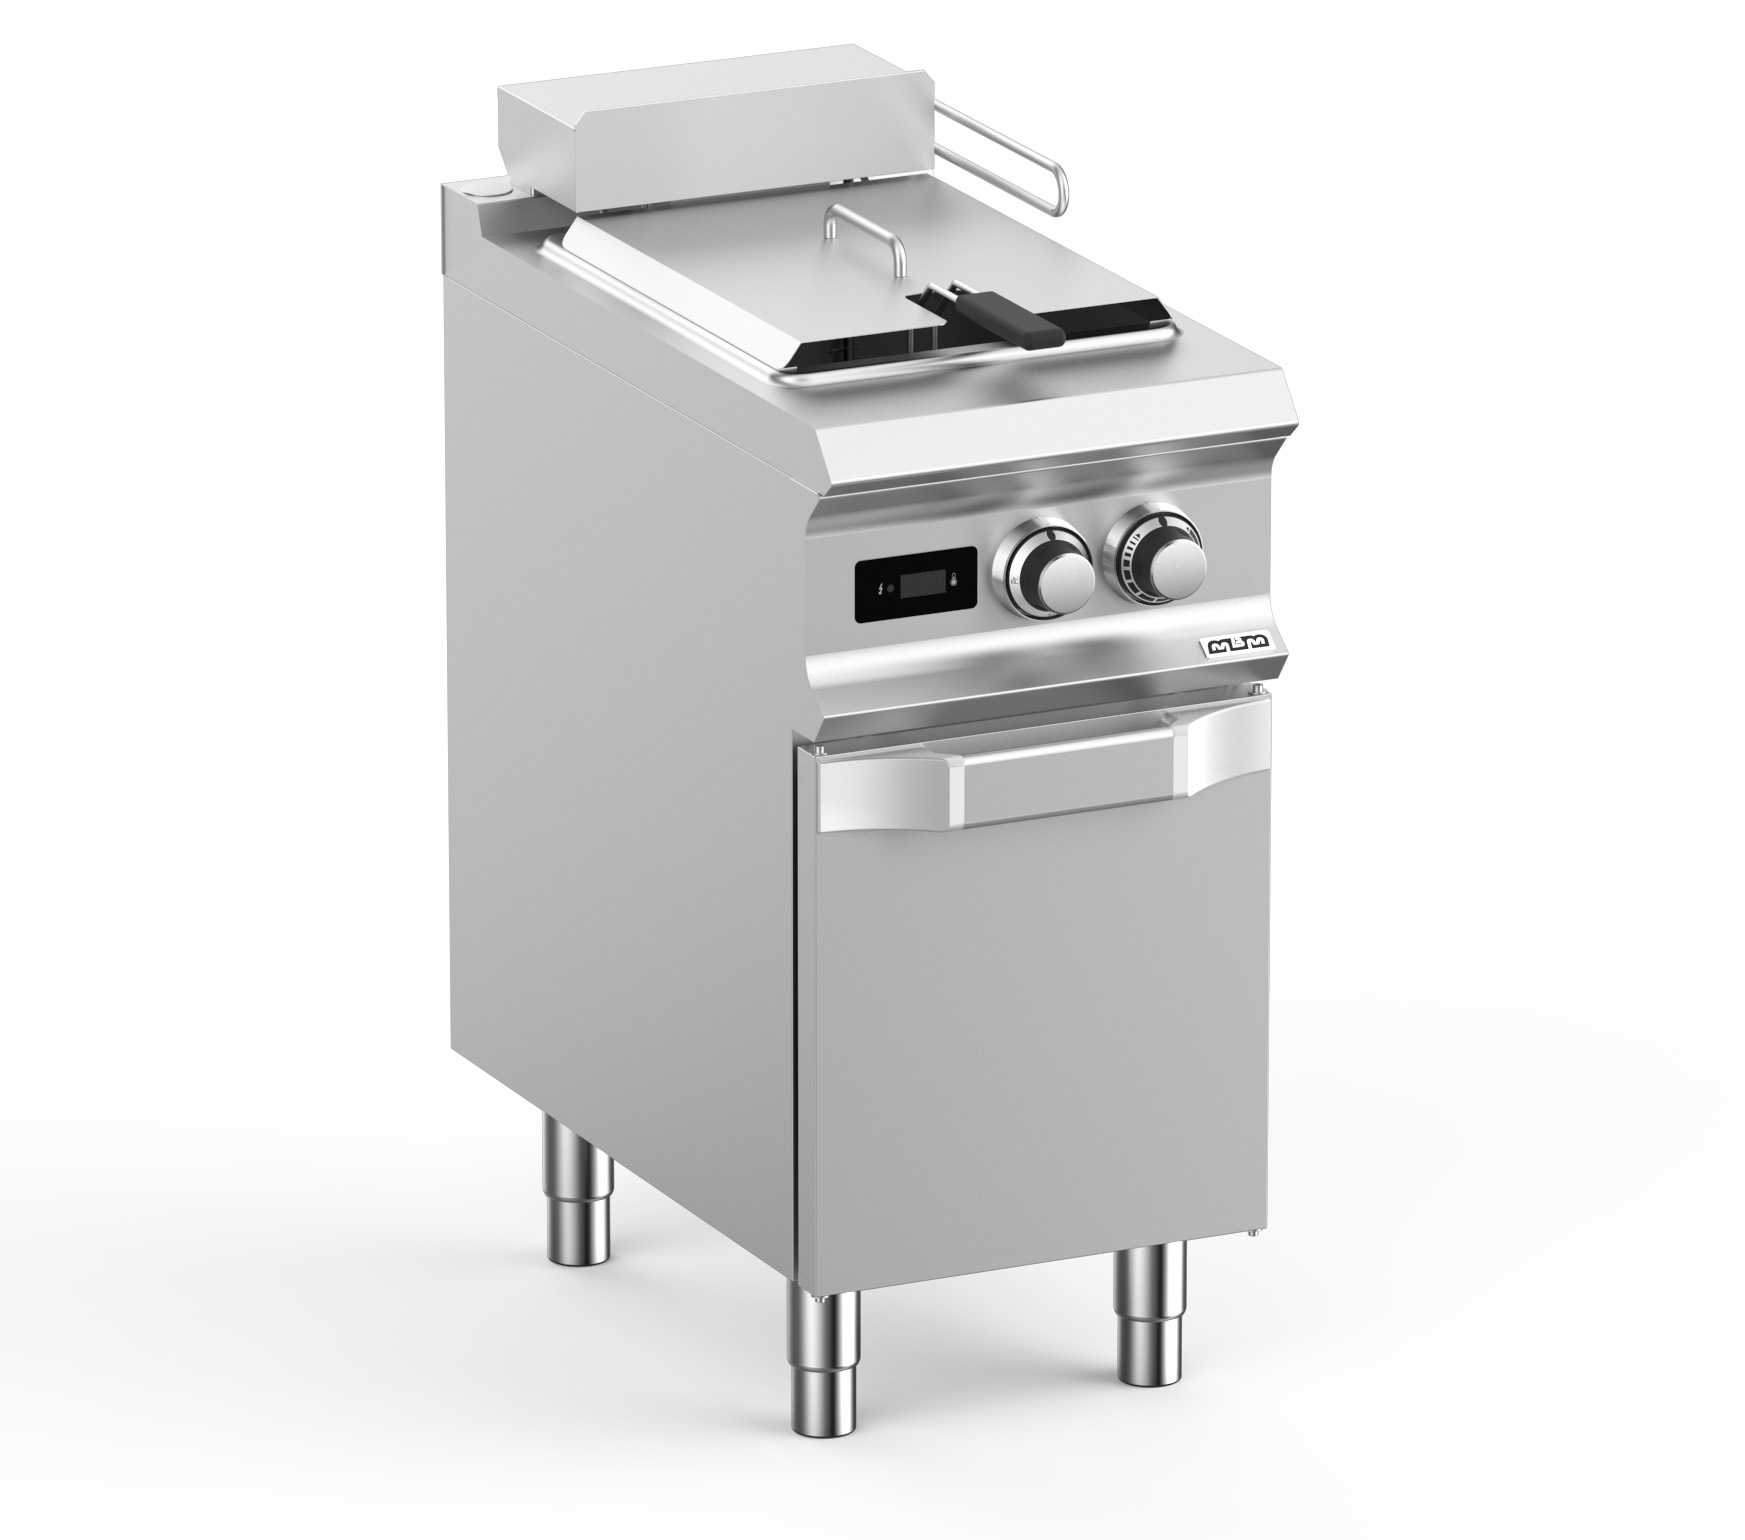 Domina Pro 700 FRBE74AHP 1 Bowl Electric Freestanding Fryer